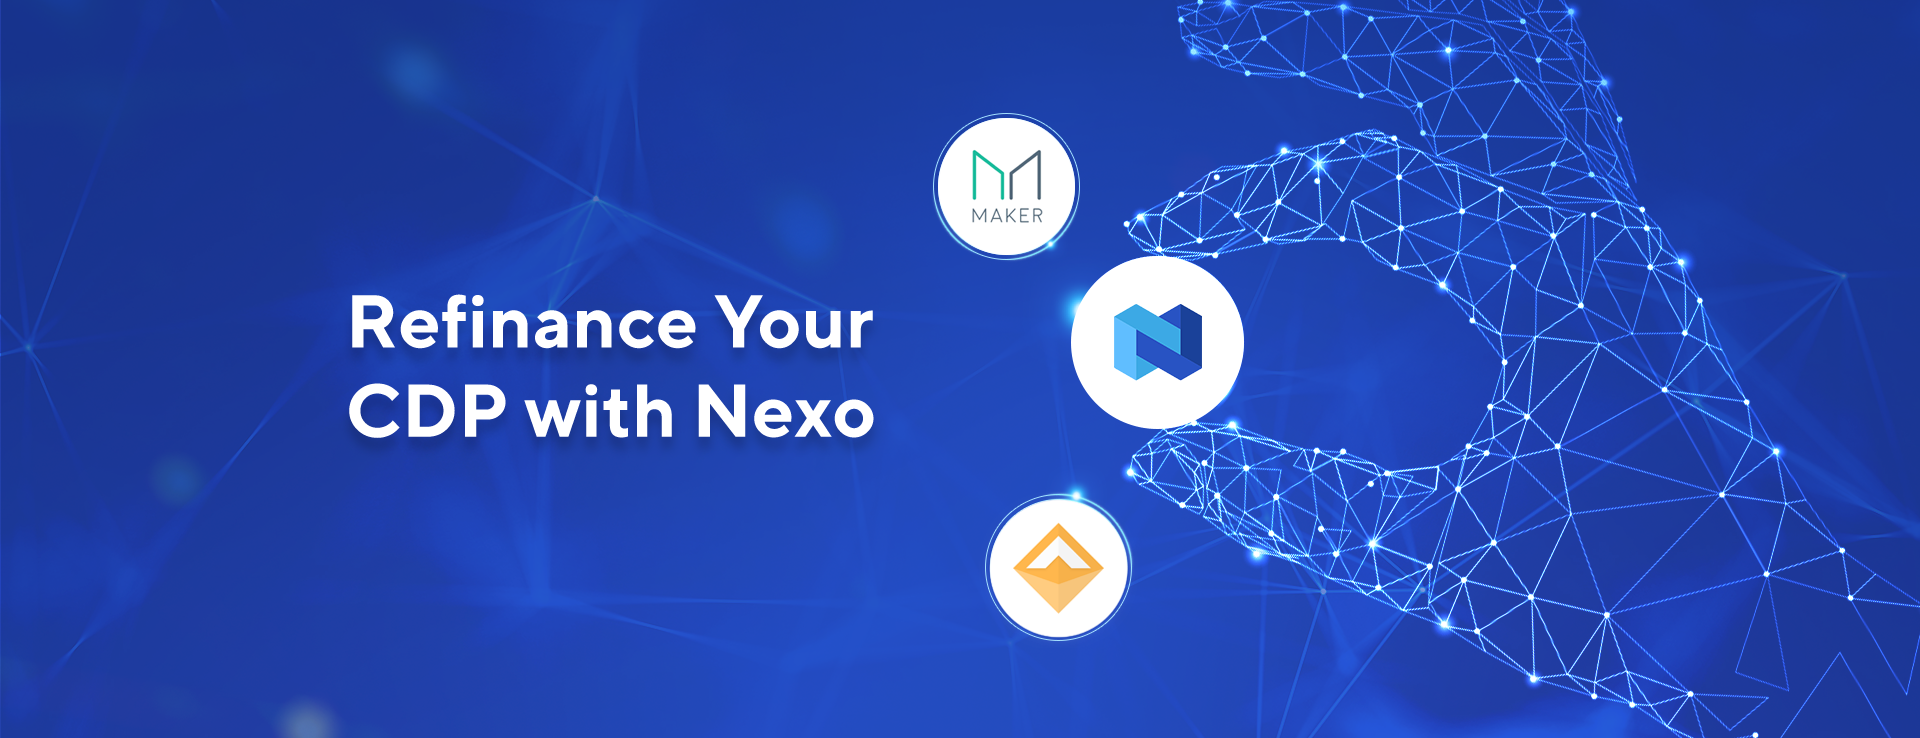 Refinance Your CDP at 8% with Nexo